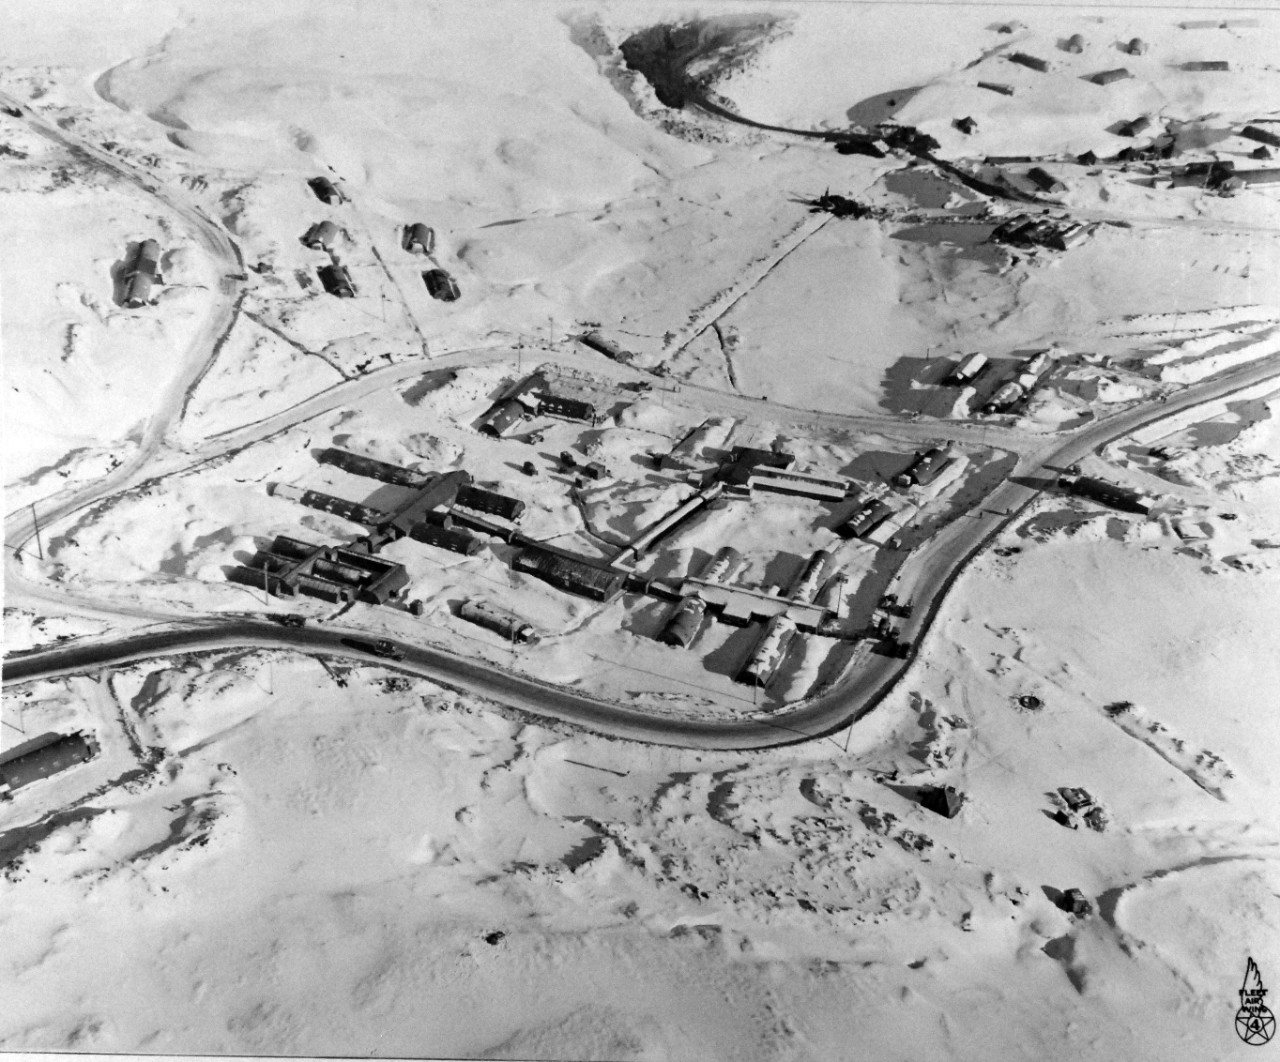 80-G-209531:  U.S. Naval Air Station hospital area at Massacre Bay, Attu Island in Alaska.  Aerial View.  Official U.S. Navy Photograph, now in the collections of the National Archives. (2017/07/11).